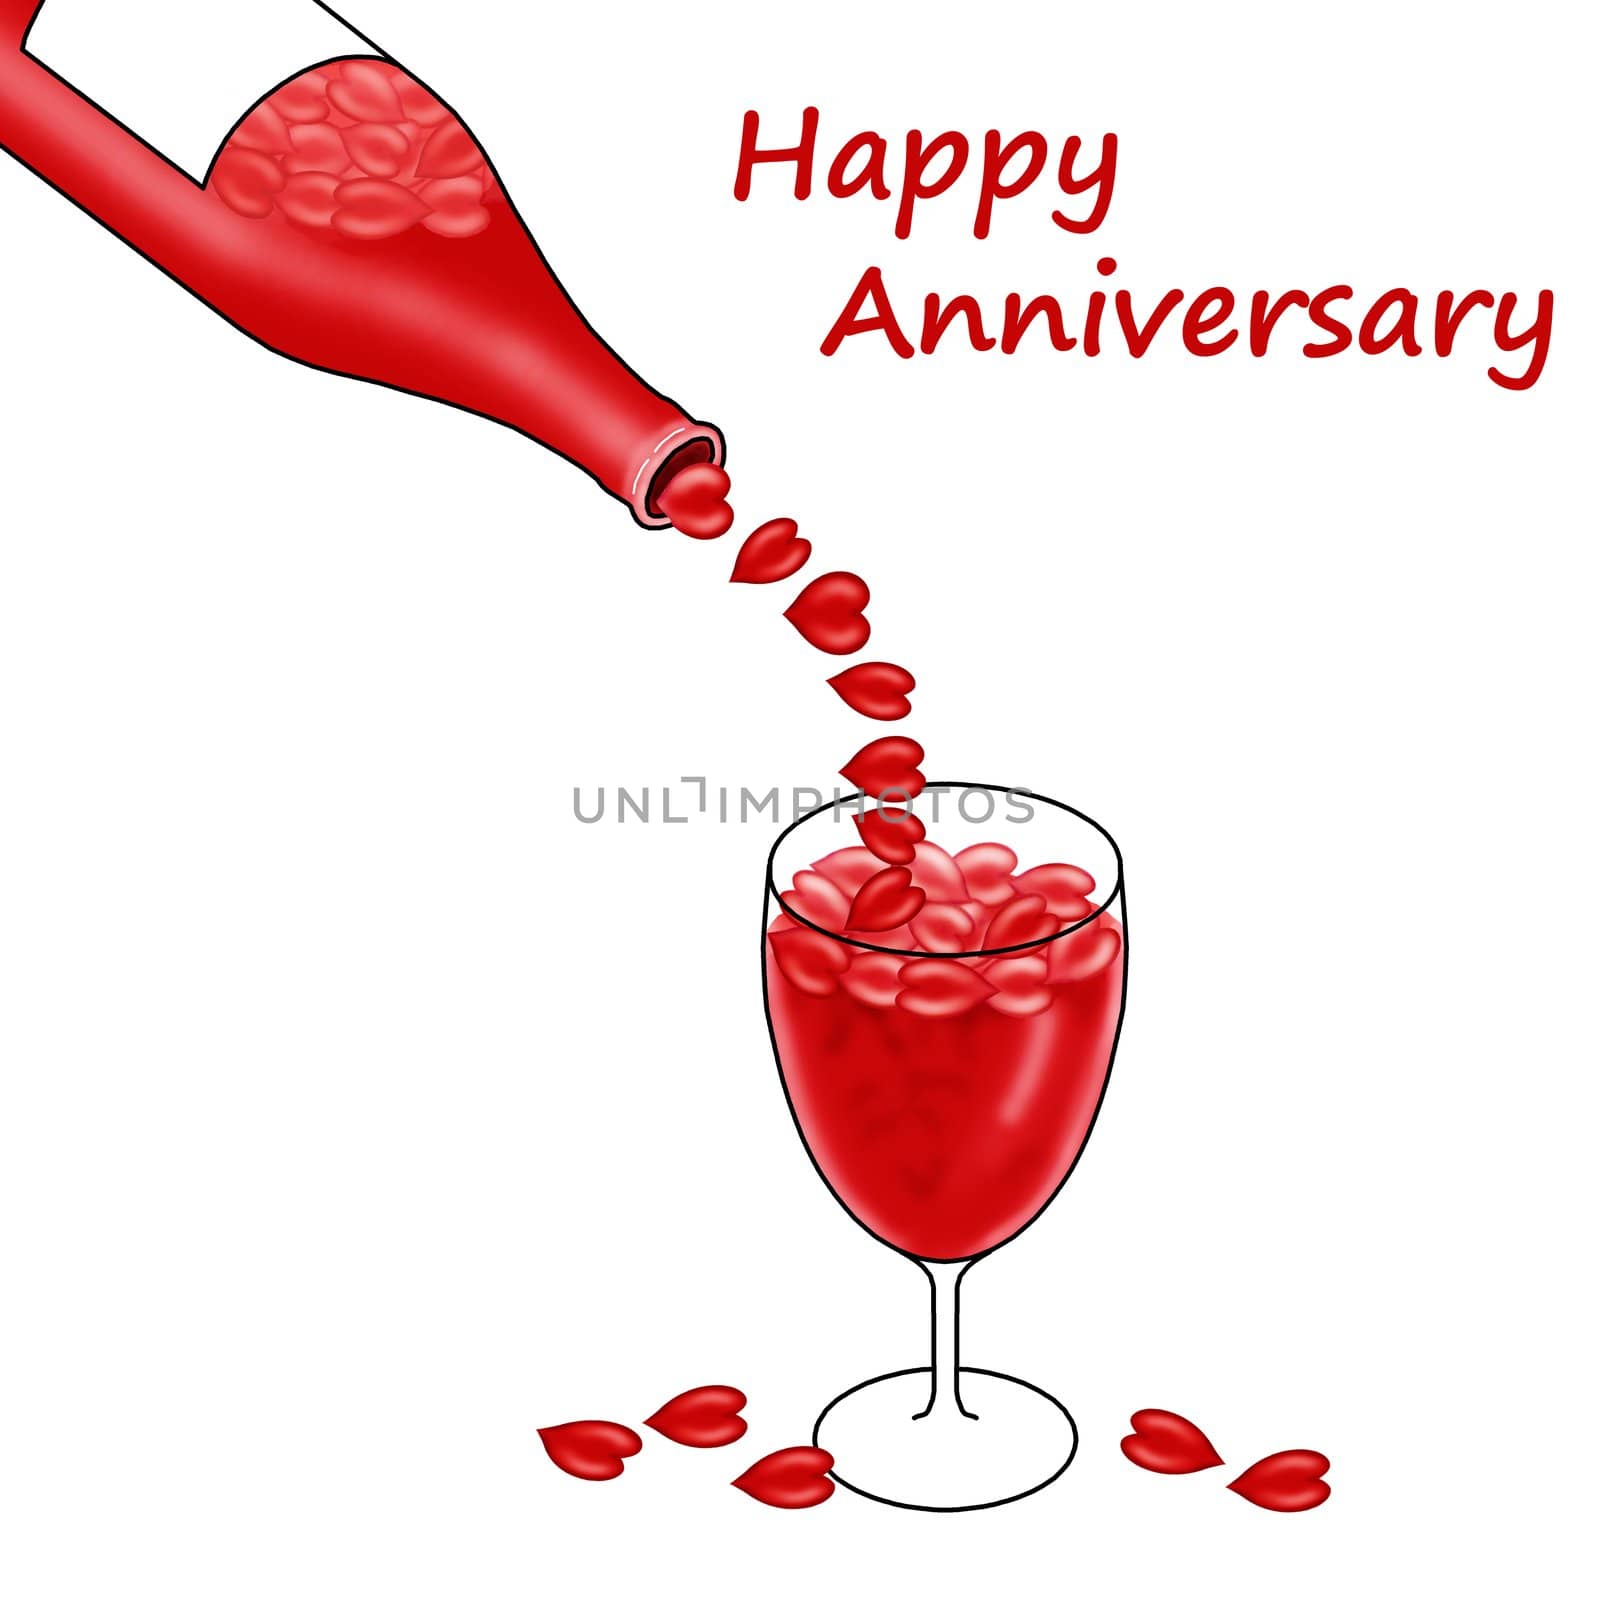 Happy anniversary card with a wine bottle and hearts by acremead